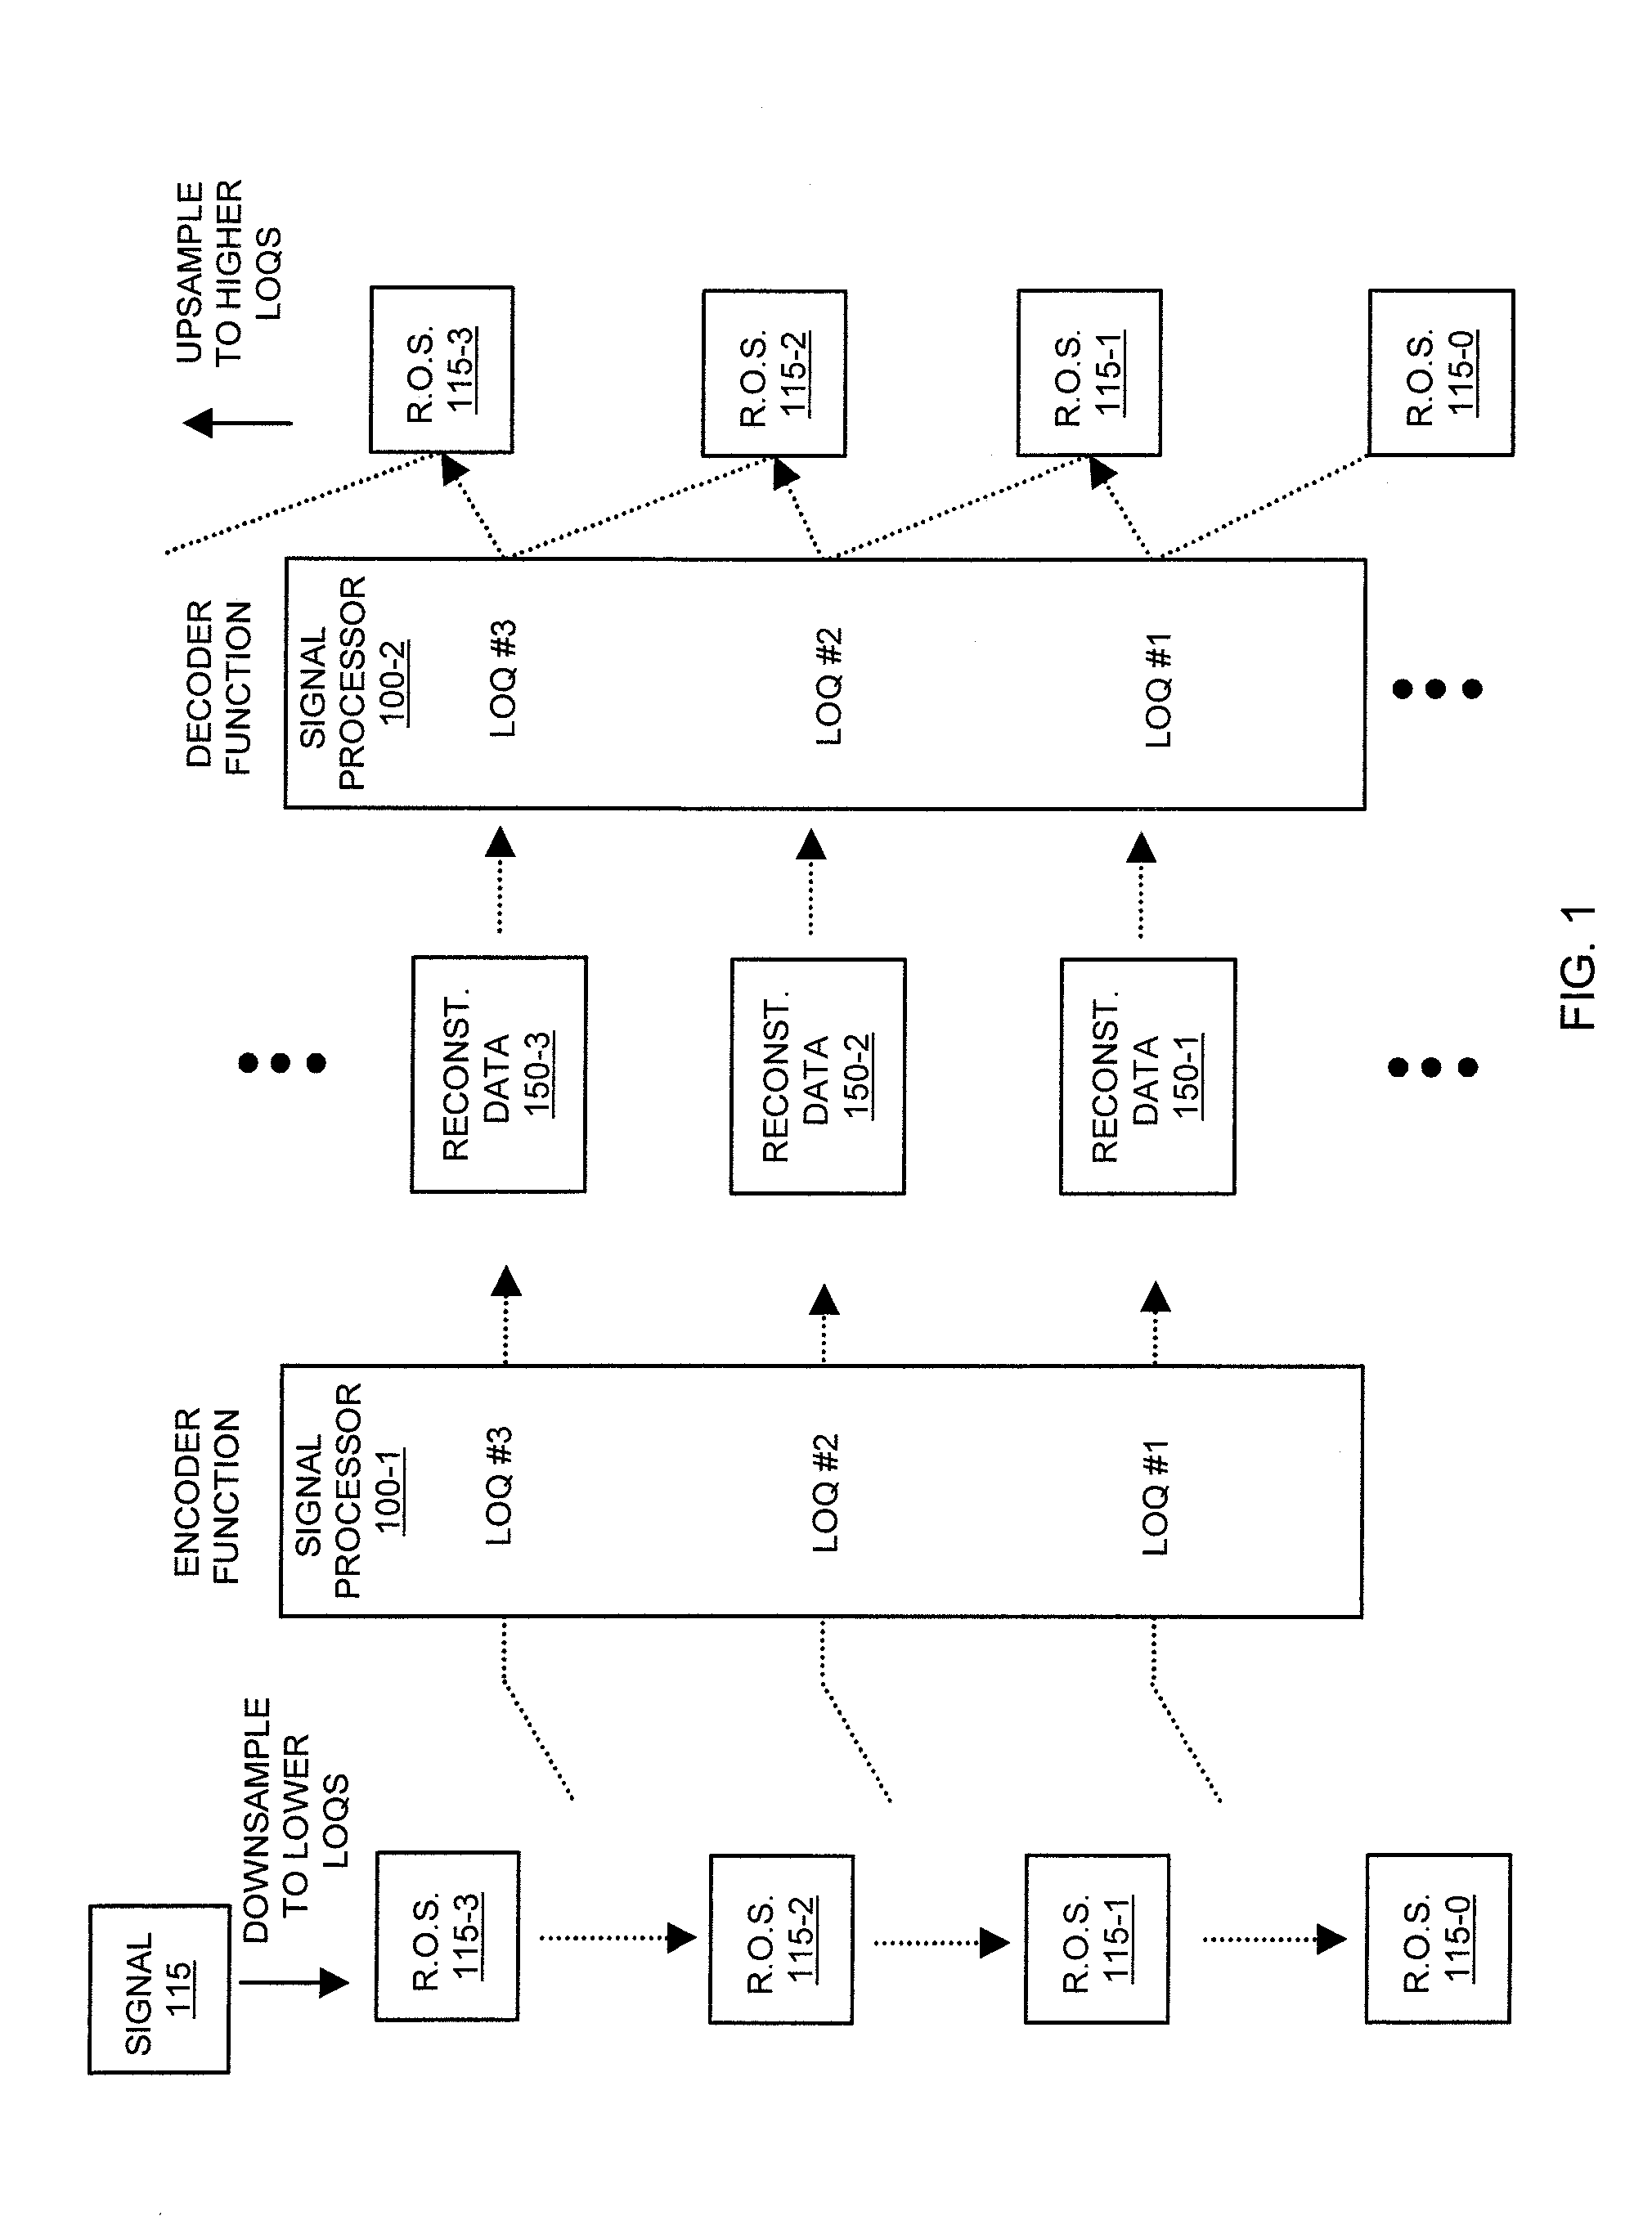 Transmission of reconstruction data in a tiered signal quality hierarchy